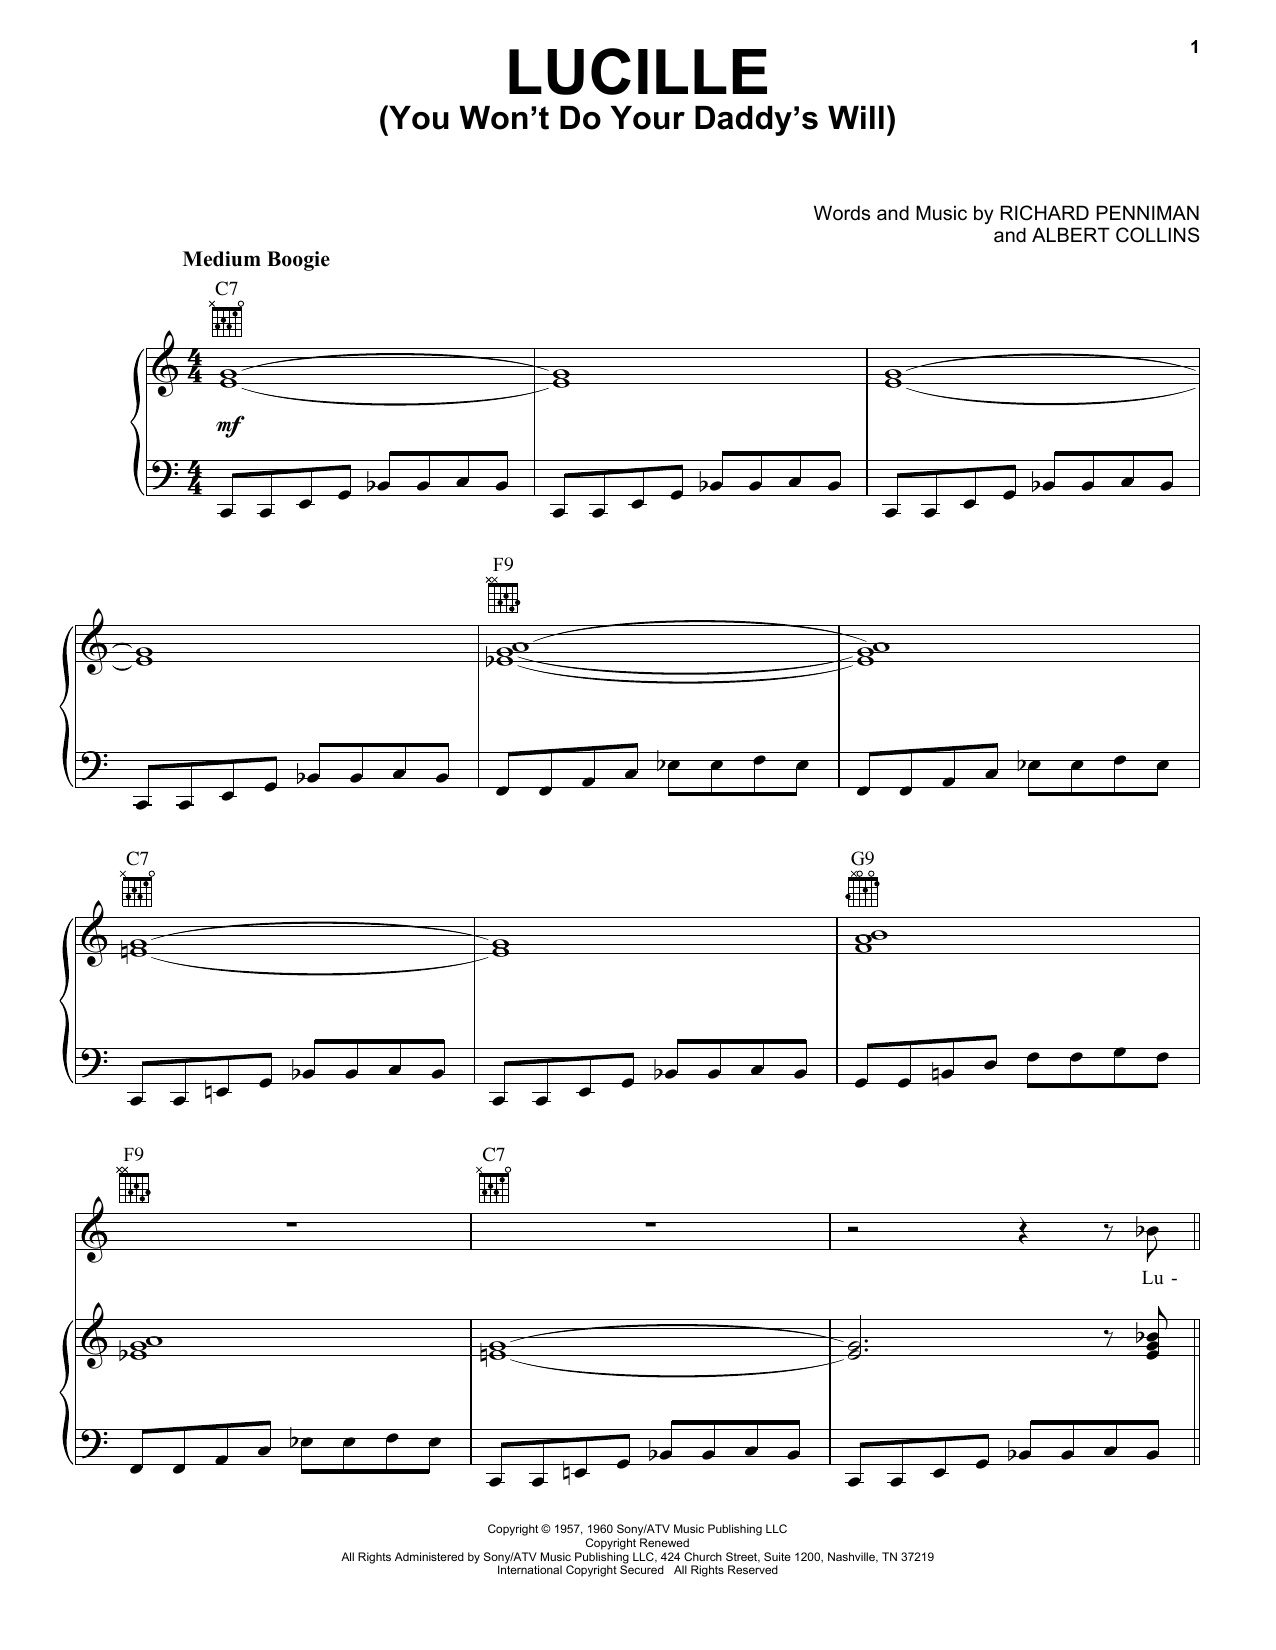 Download Little Richard Lucille (You Won't Do Your Daddy's Will Sheet Music